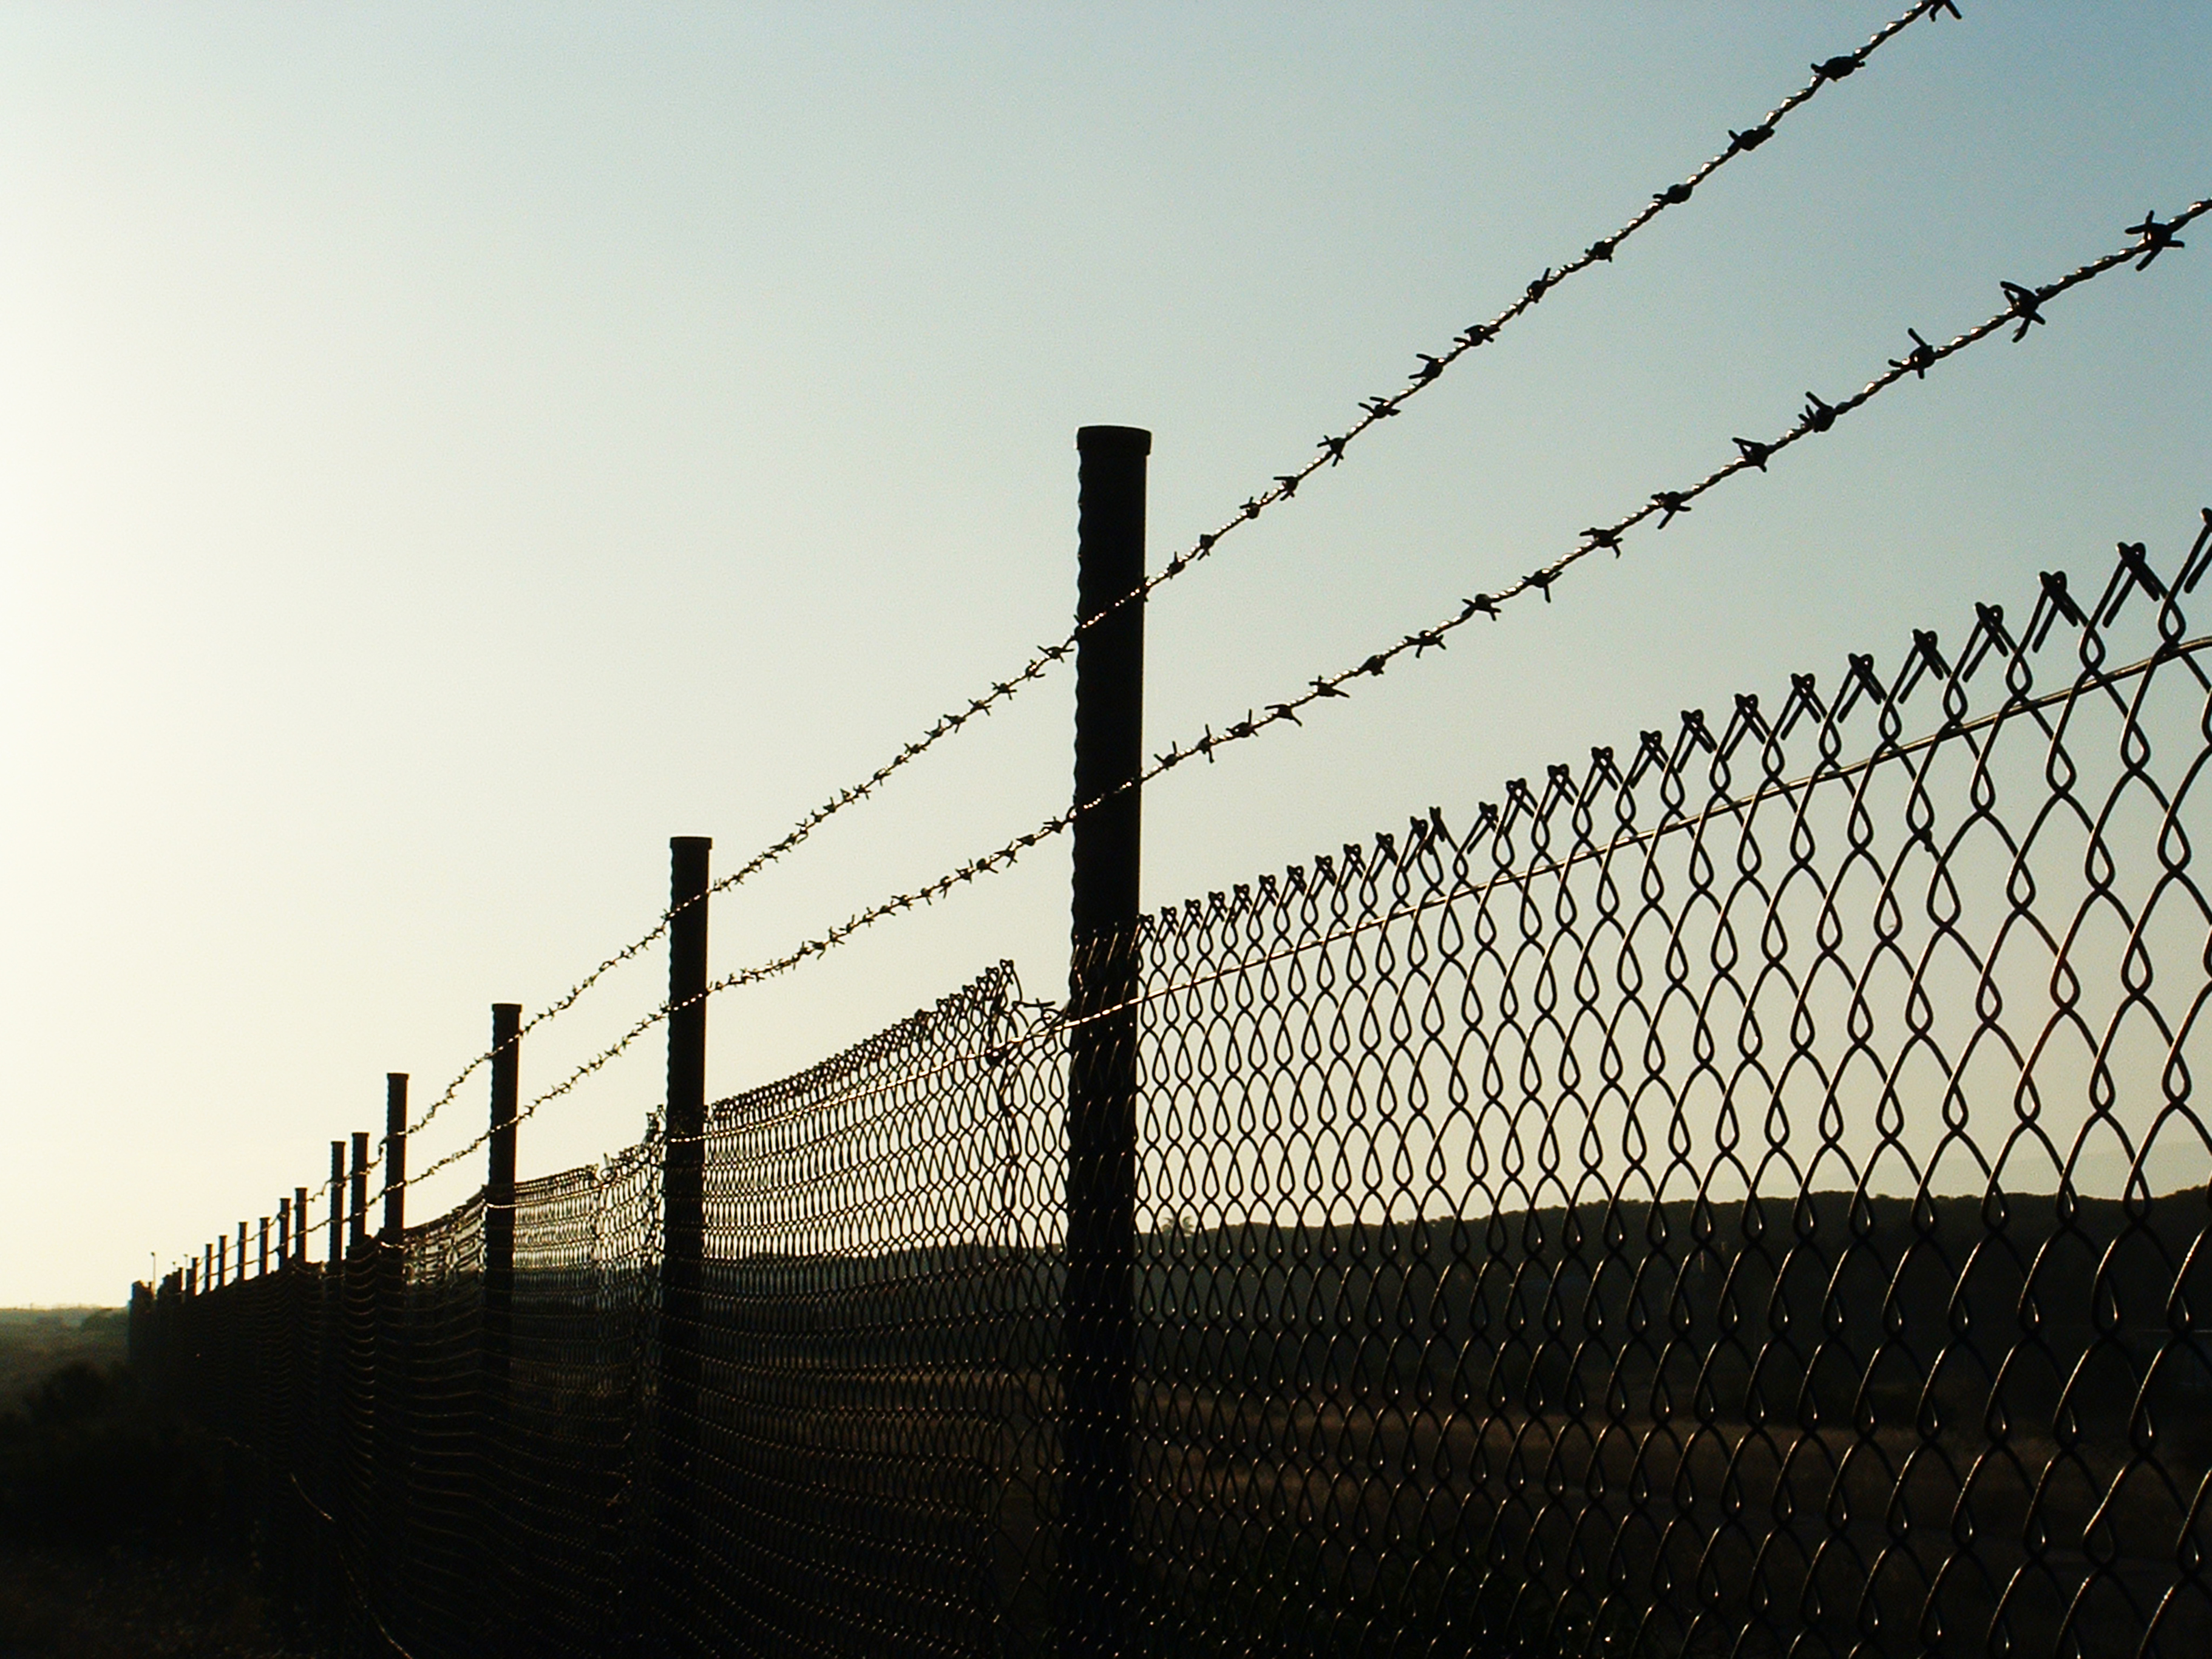 landscape with barbed wire /fence on sunset